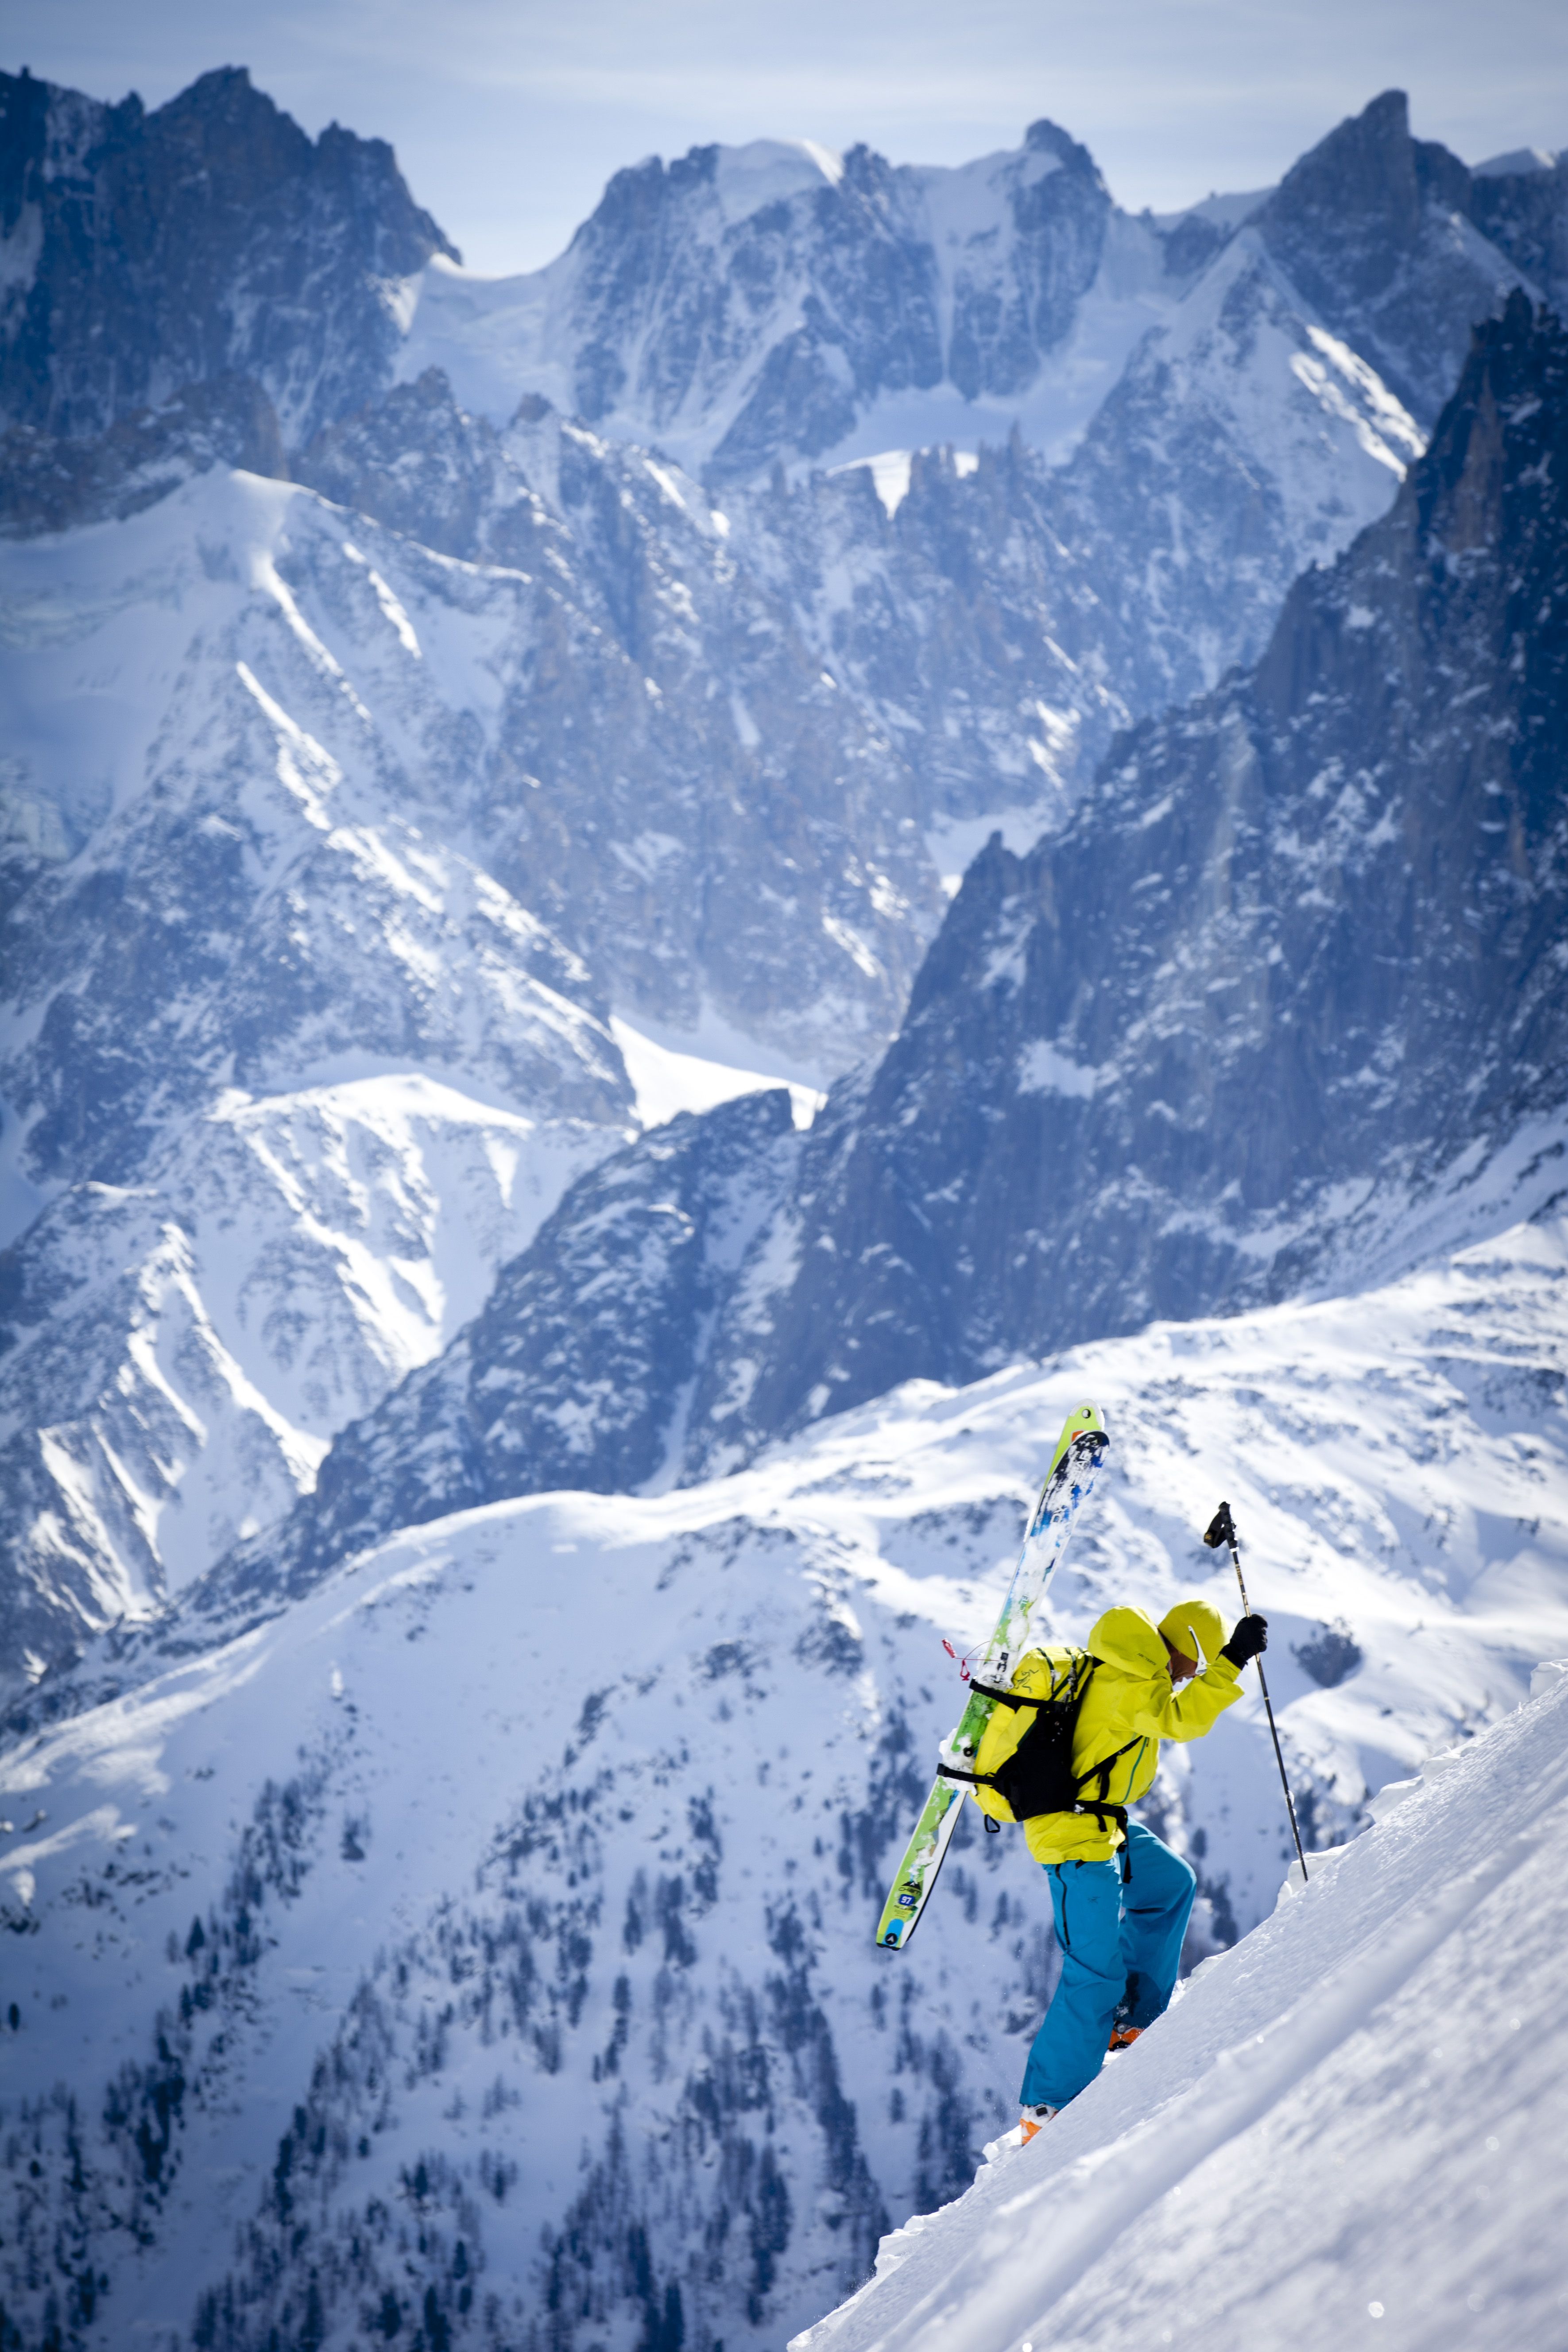 Arc'Teryx: Heli Ski Jackets & Outerwear Of Choice What's Up